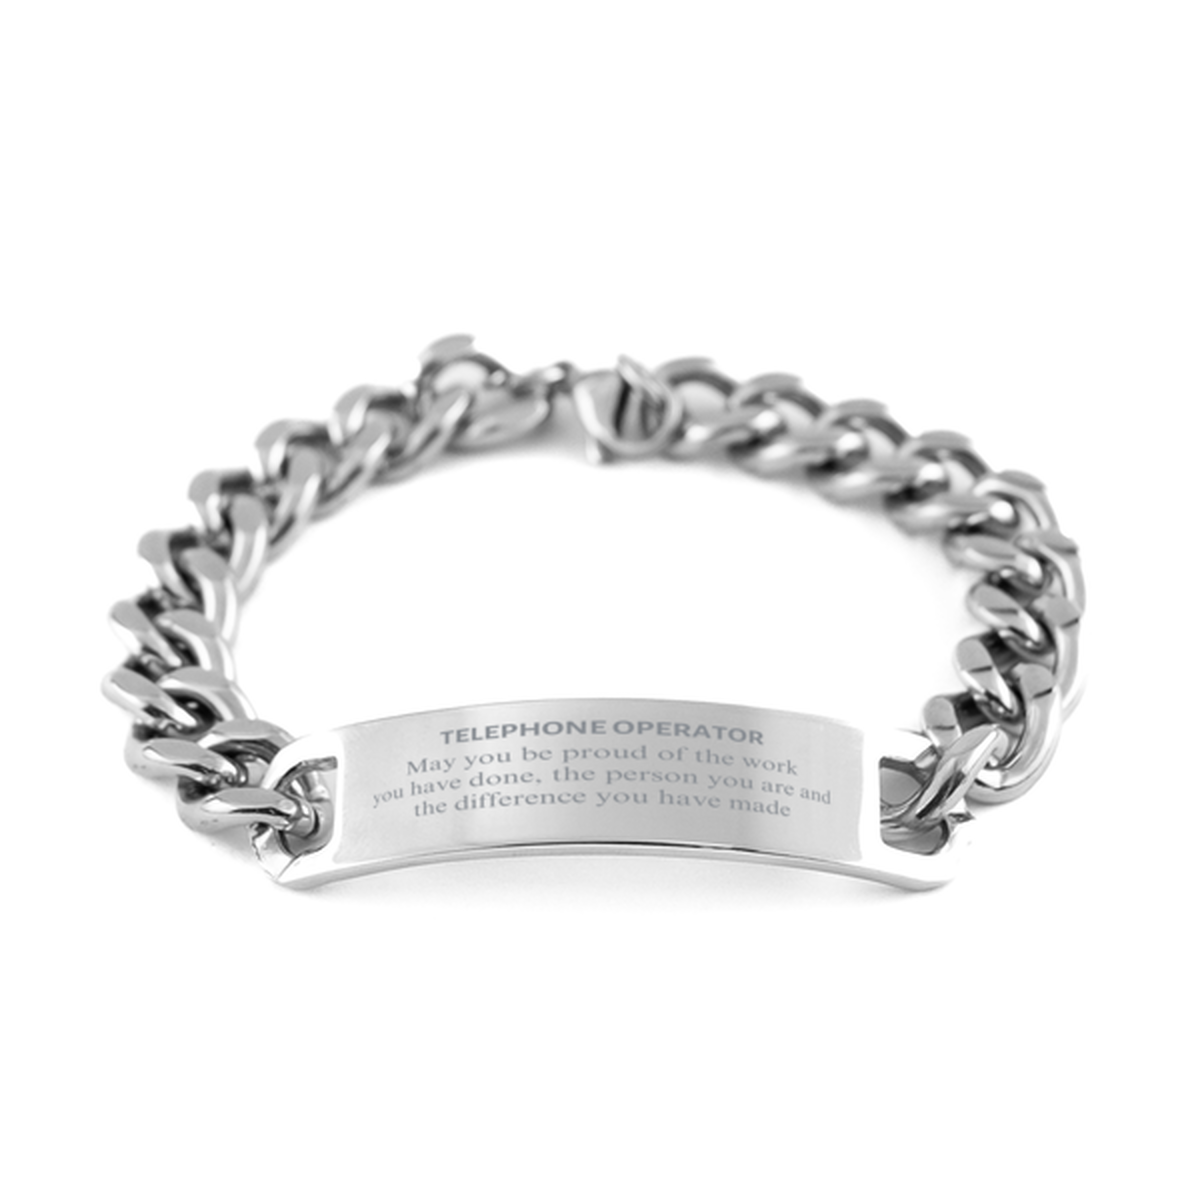 Telephone Operator May you be proud of the work you have done, Retirement Telephone Operator Cuban Chain Stainless Steel Bracelet for Colleague Appreciation Gifts Amazing for Telephone Operator